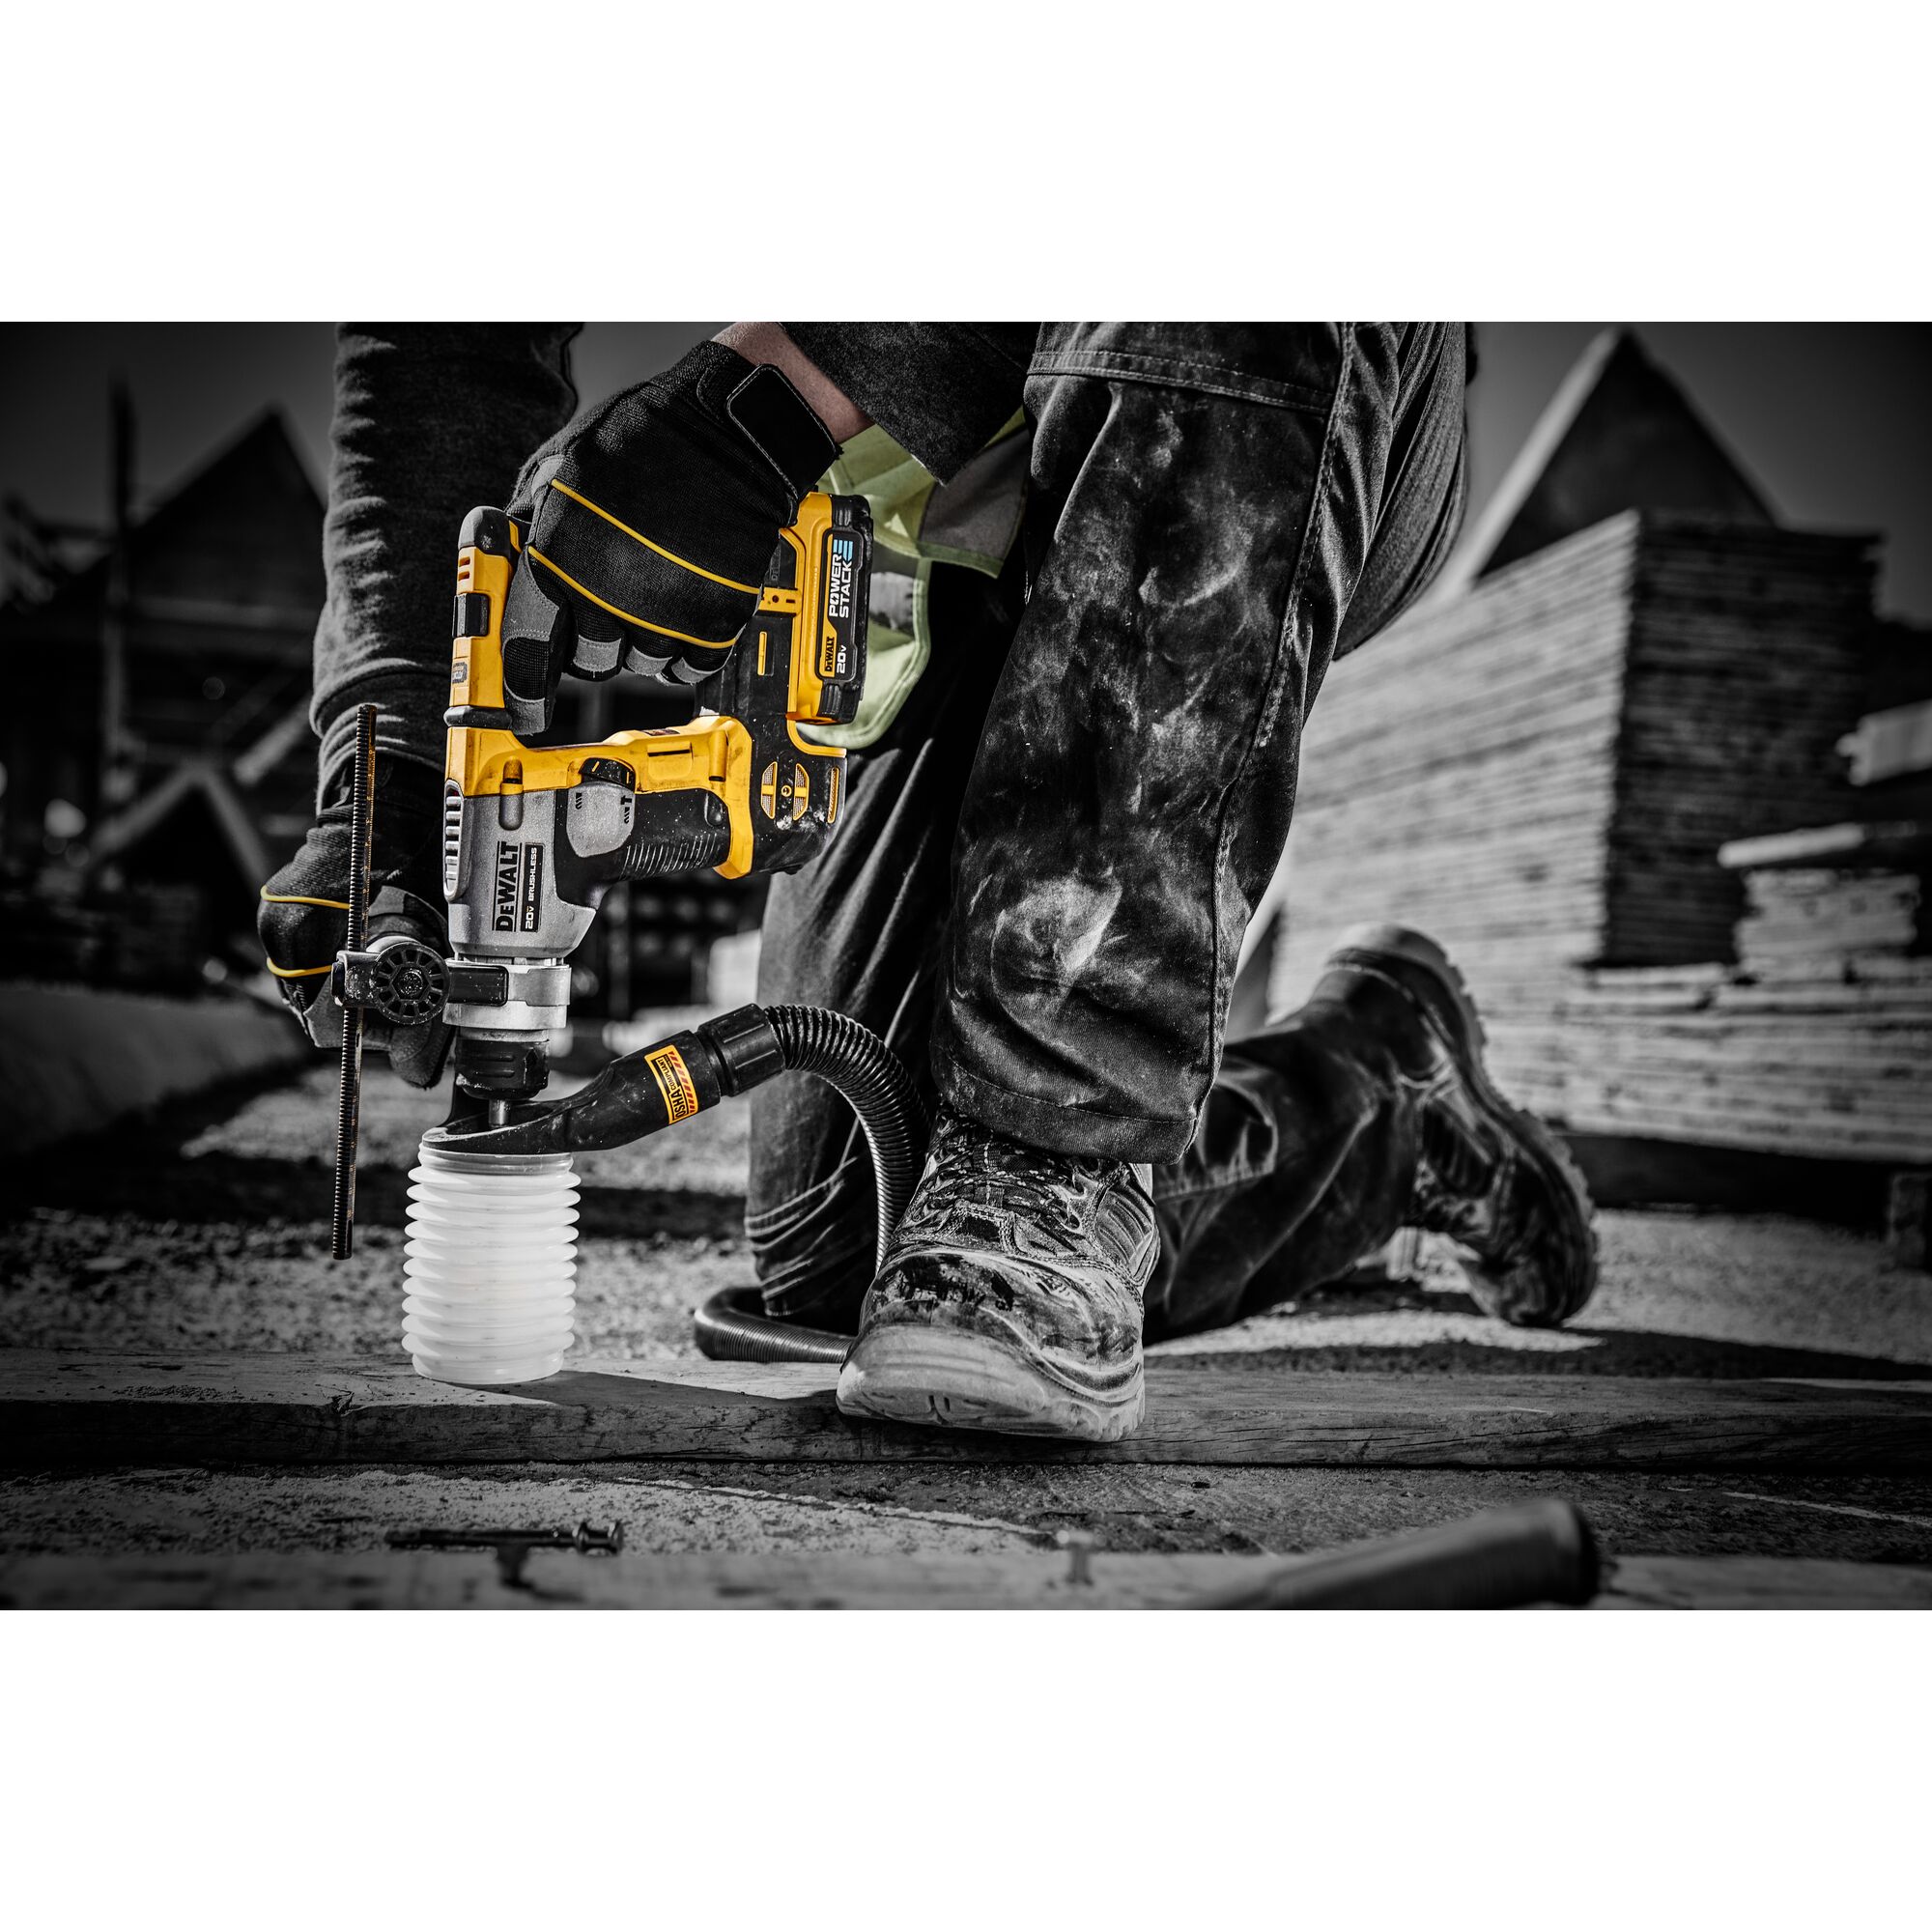 DEWALT 20V MAX* Starter Kit with POWERSTACK™ Compact Battery and Charger  (DCBP034C)